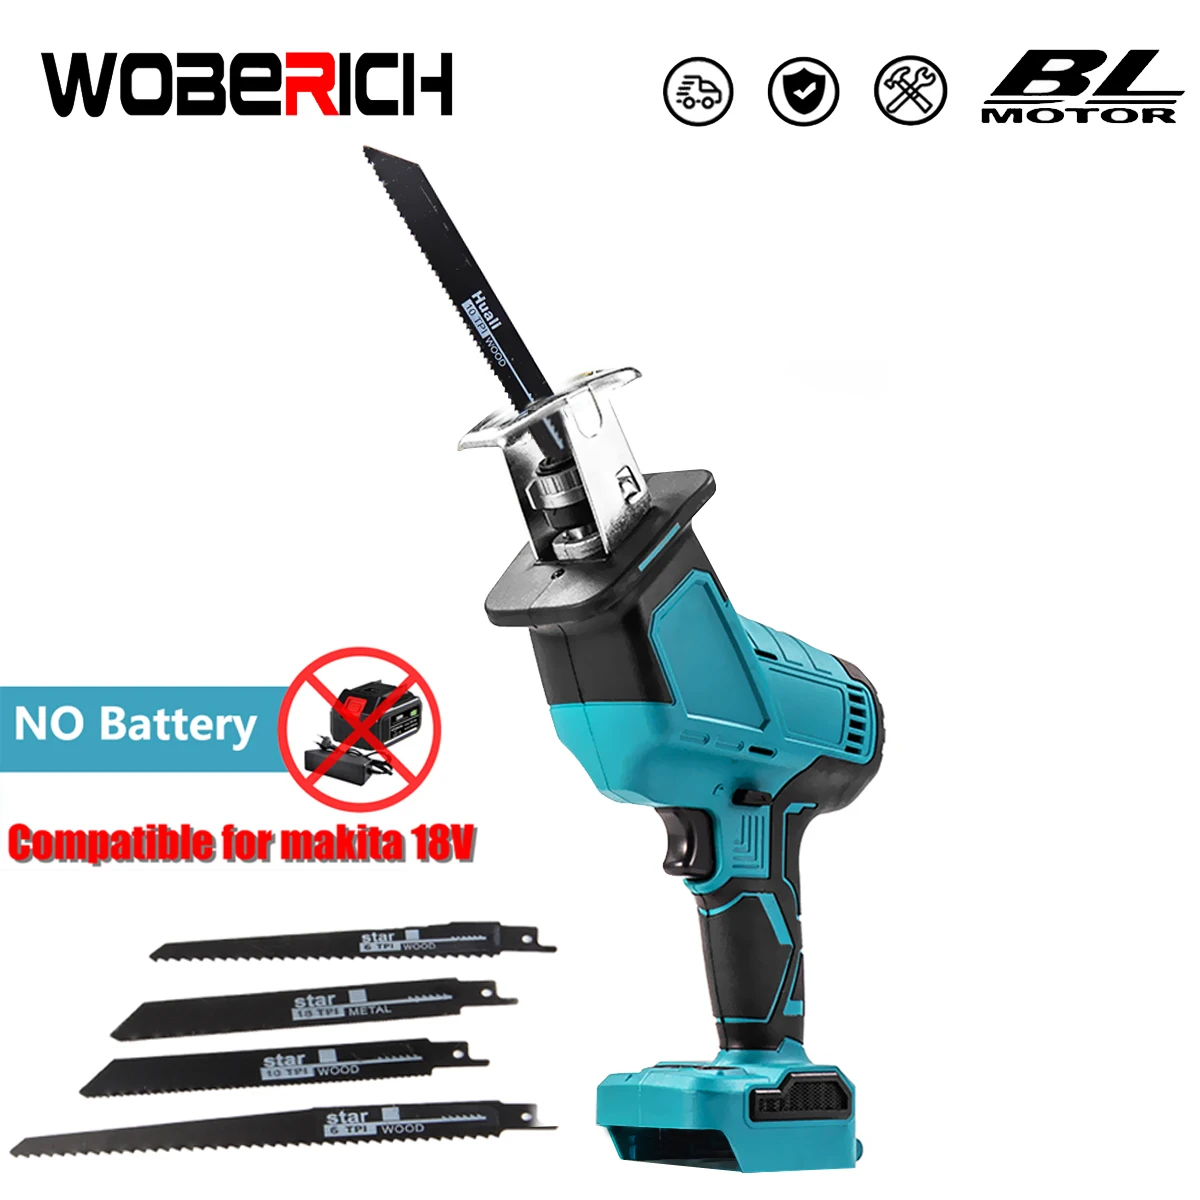 

12000SPM Brushless Cordless Electric Reciprocating Saw Variable Speed Metal Wood Cutter Tool For Makita 18V Battery(Only host)